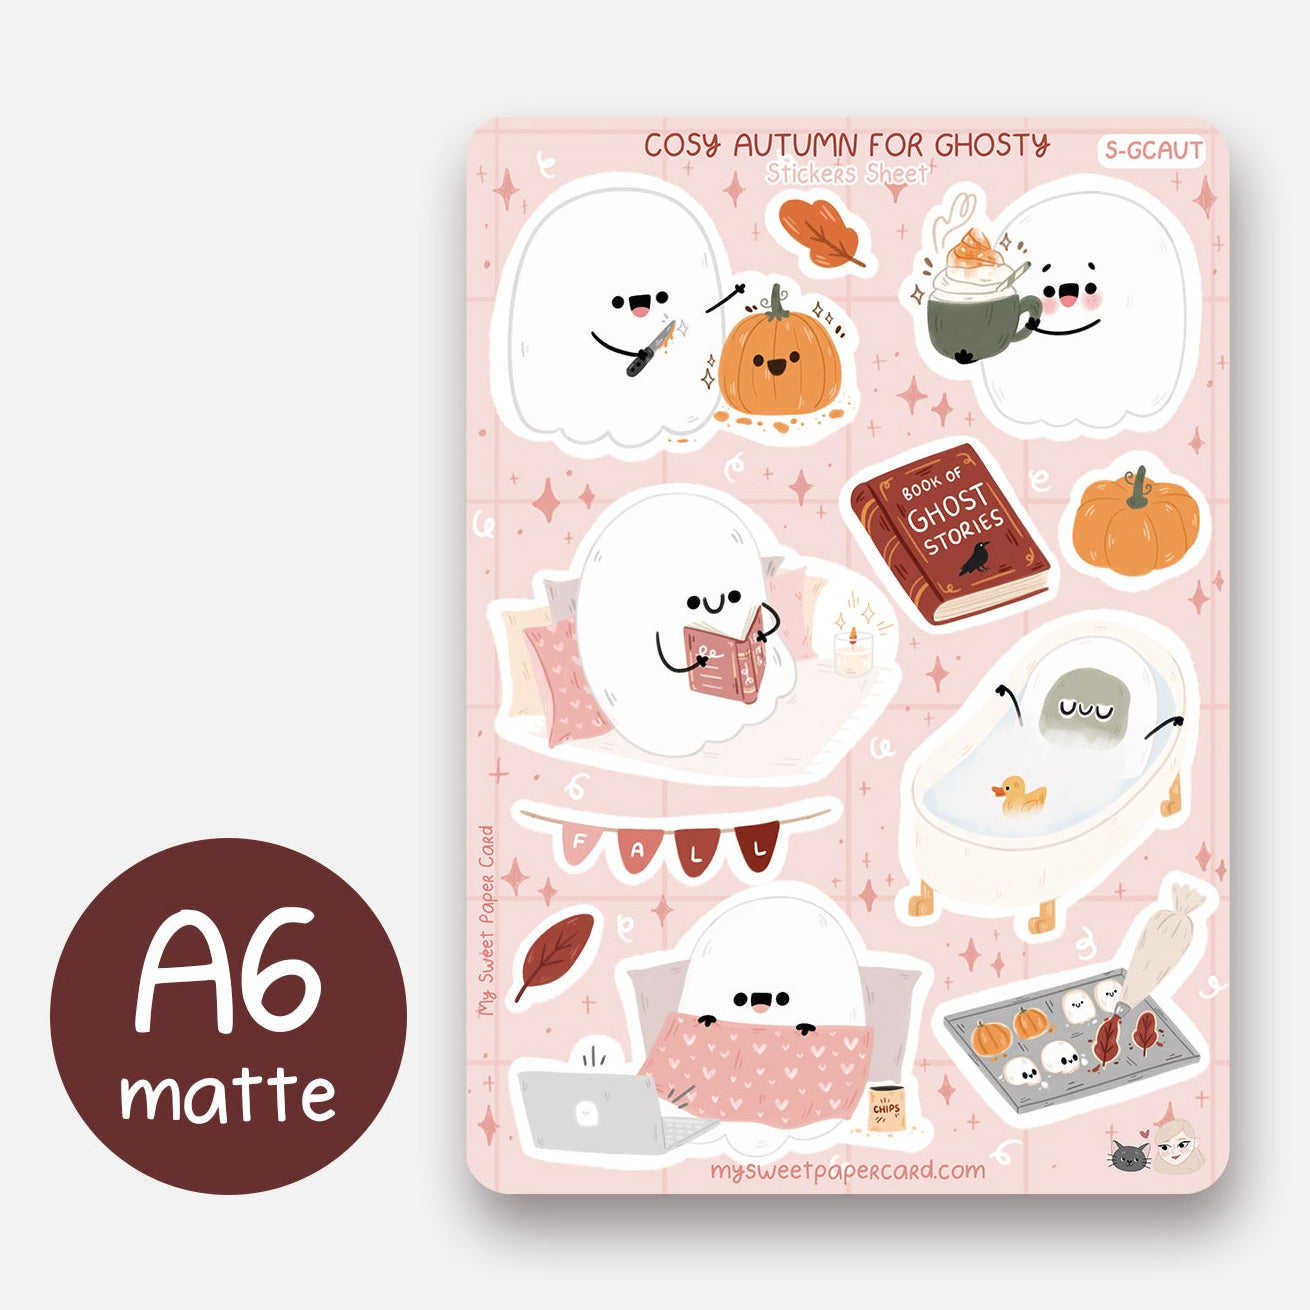 2ND SALE - Ghosty Cosy Fall Day Stickers - Halloween planner stickers